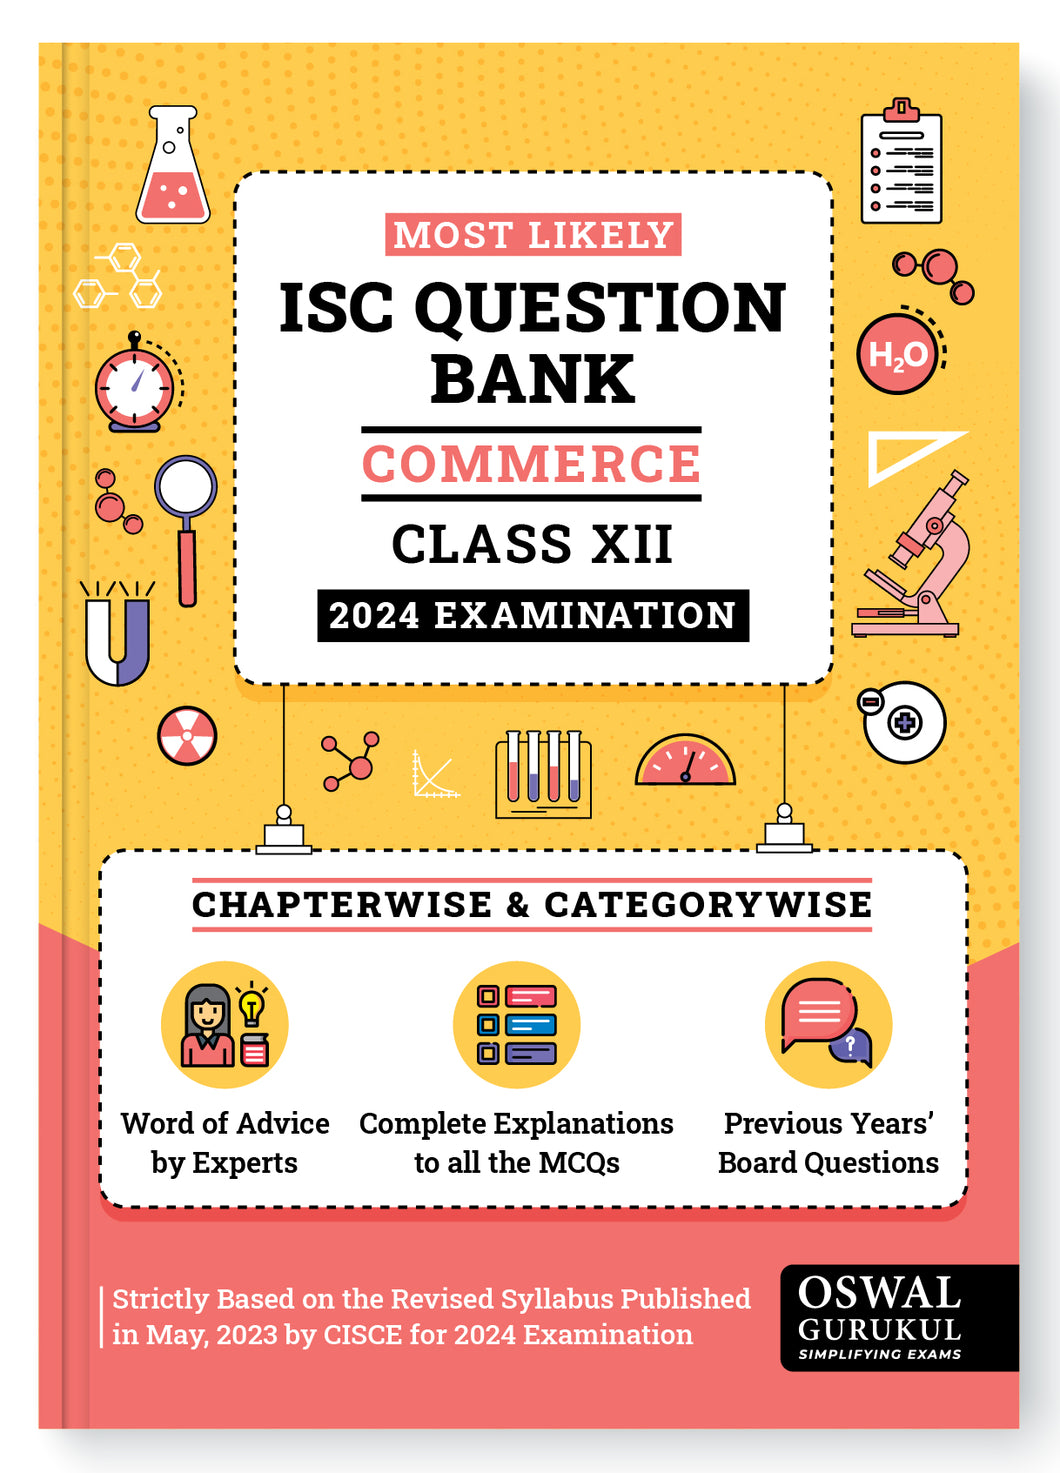 Oswal - Gurukul Commerce Most Likely Question Bank : ISC Class 12 for 2024 Exam